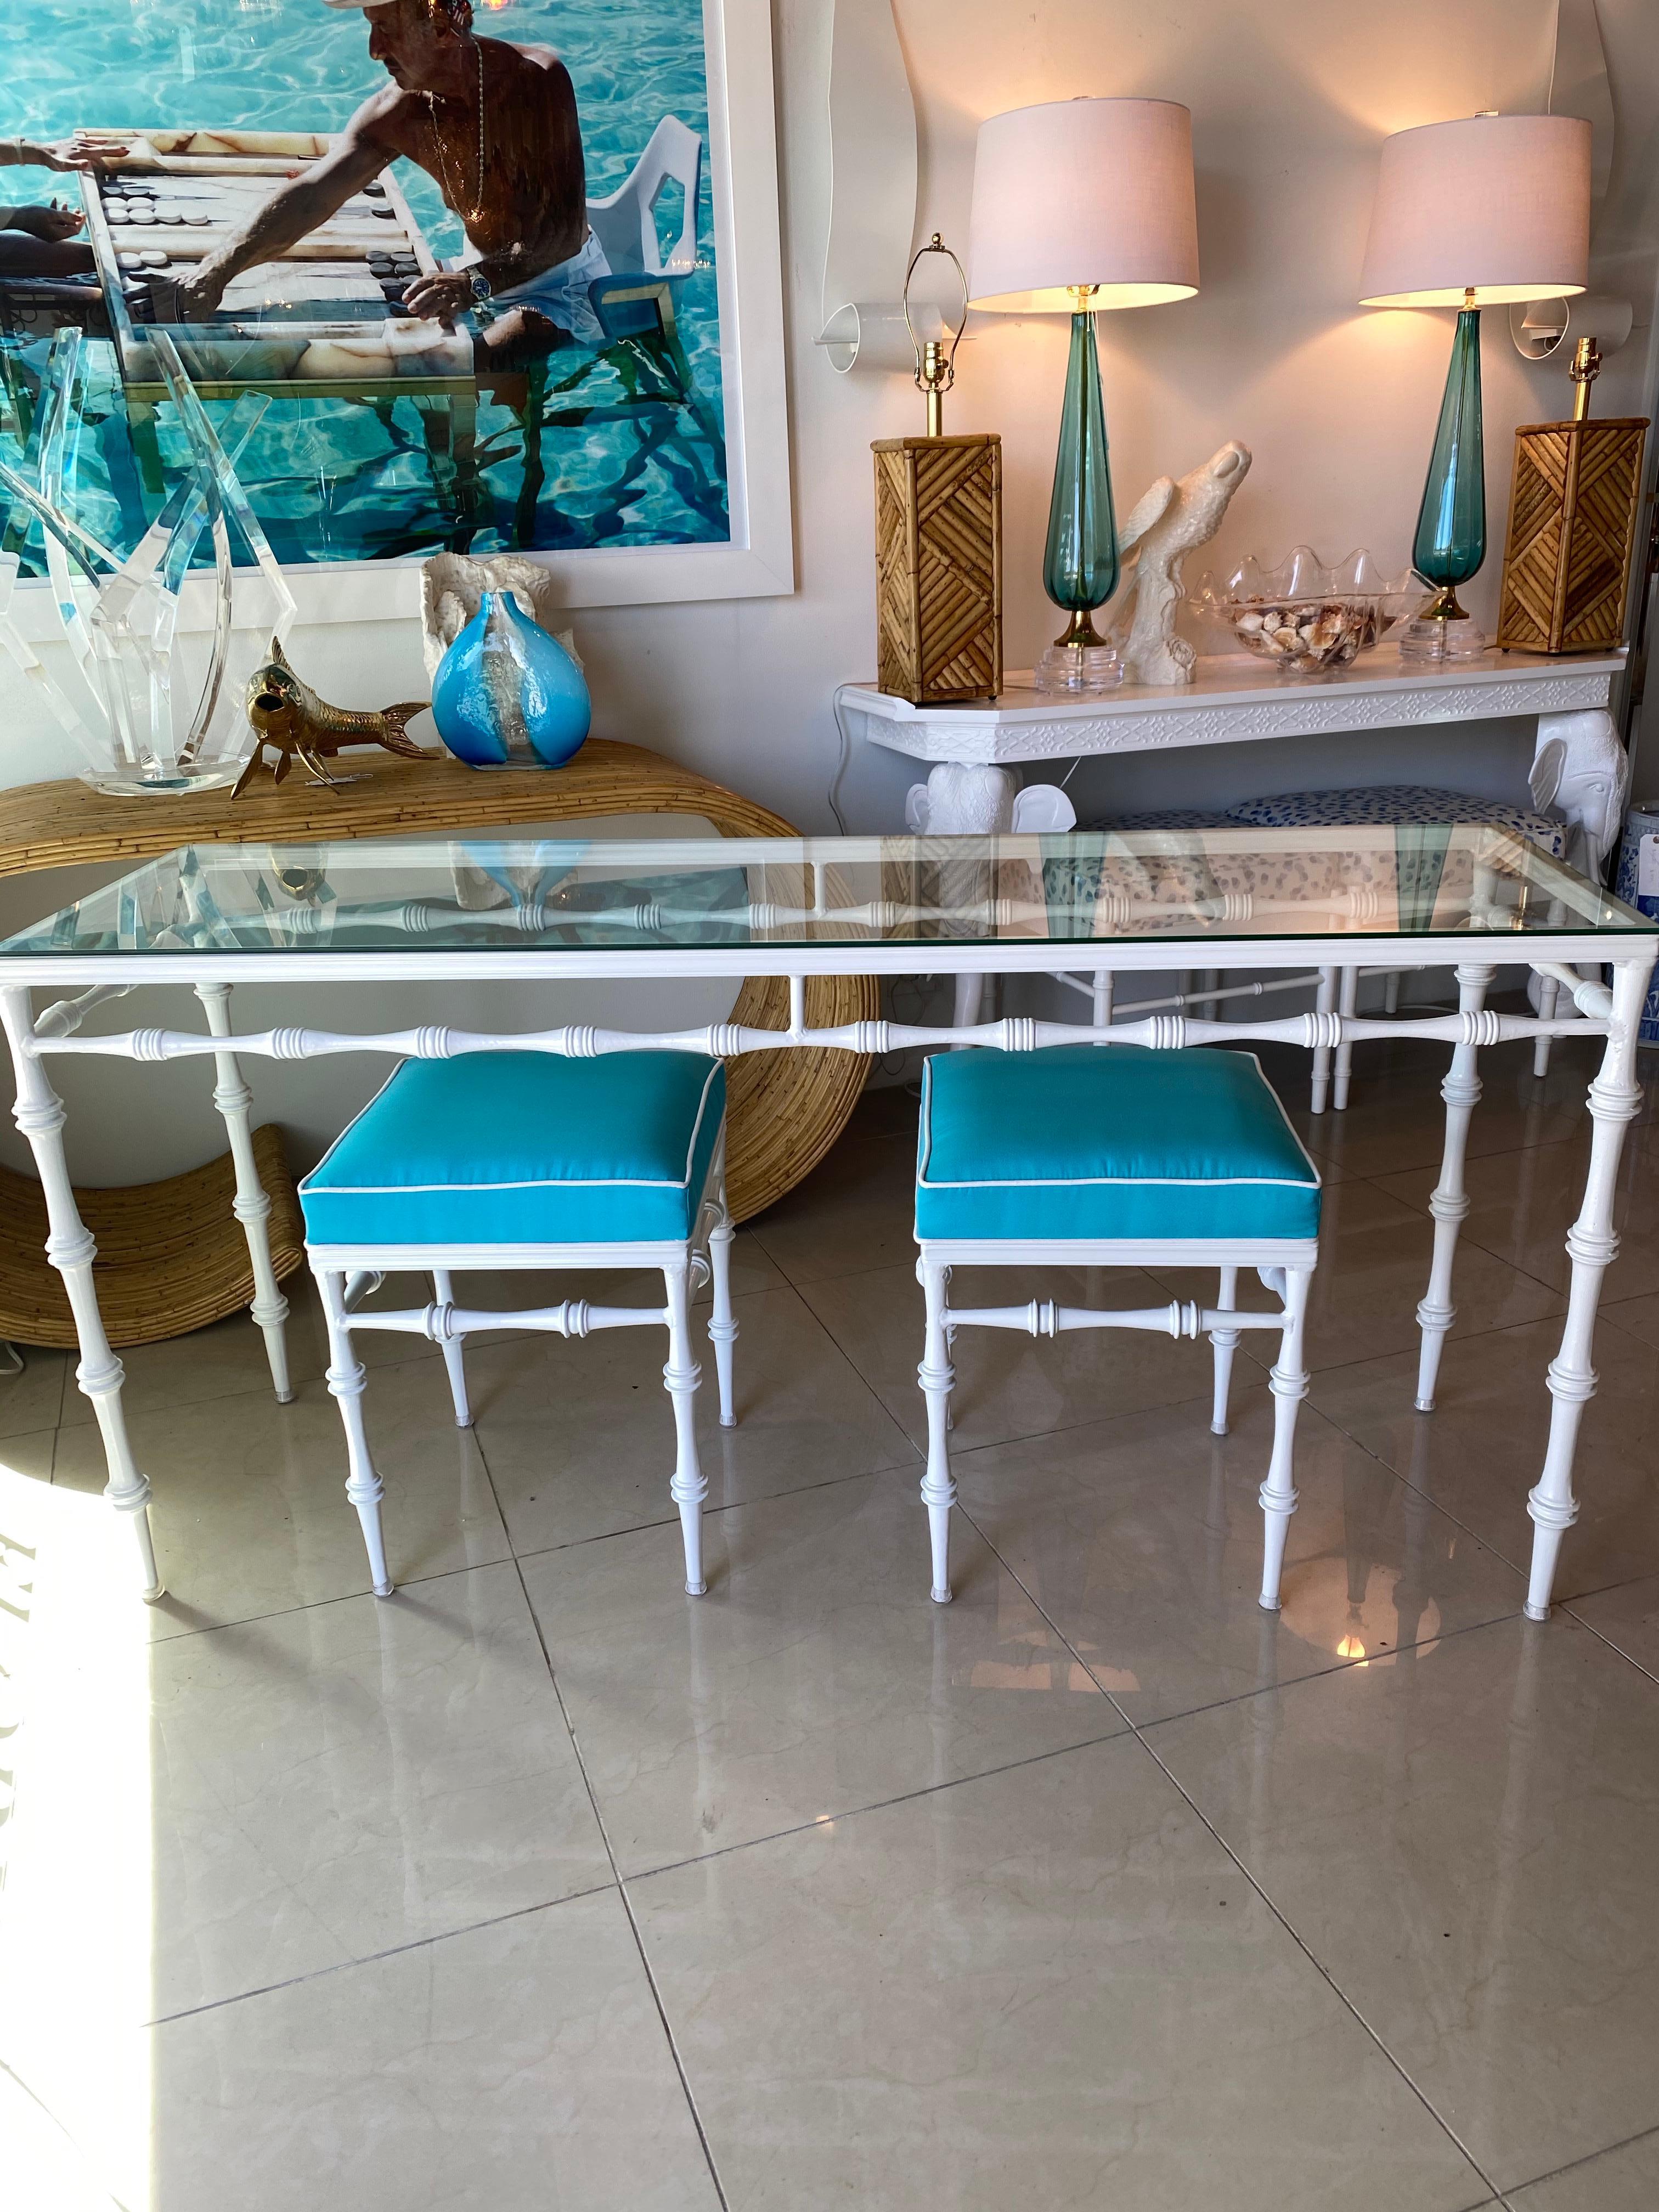 Beautiful vintage patio set by Phyllis Morris. This has been completely, professionally restored to perfection! Console table with pair of benches, ottomans. Console and benches have been professionally powder-coated in a gloss white, new glass top